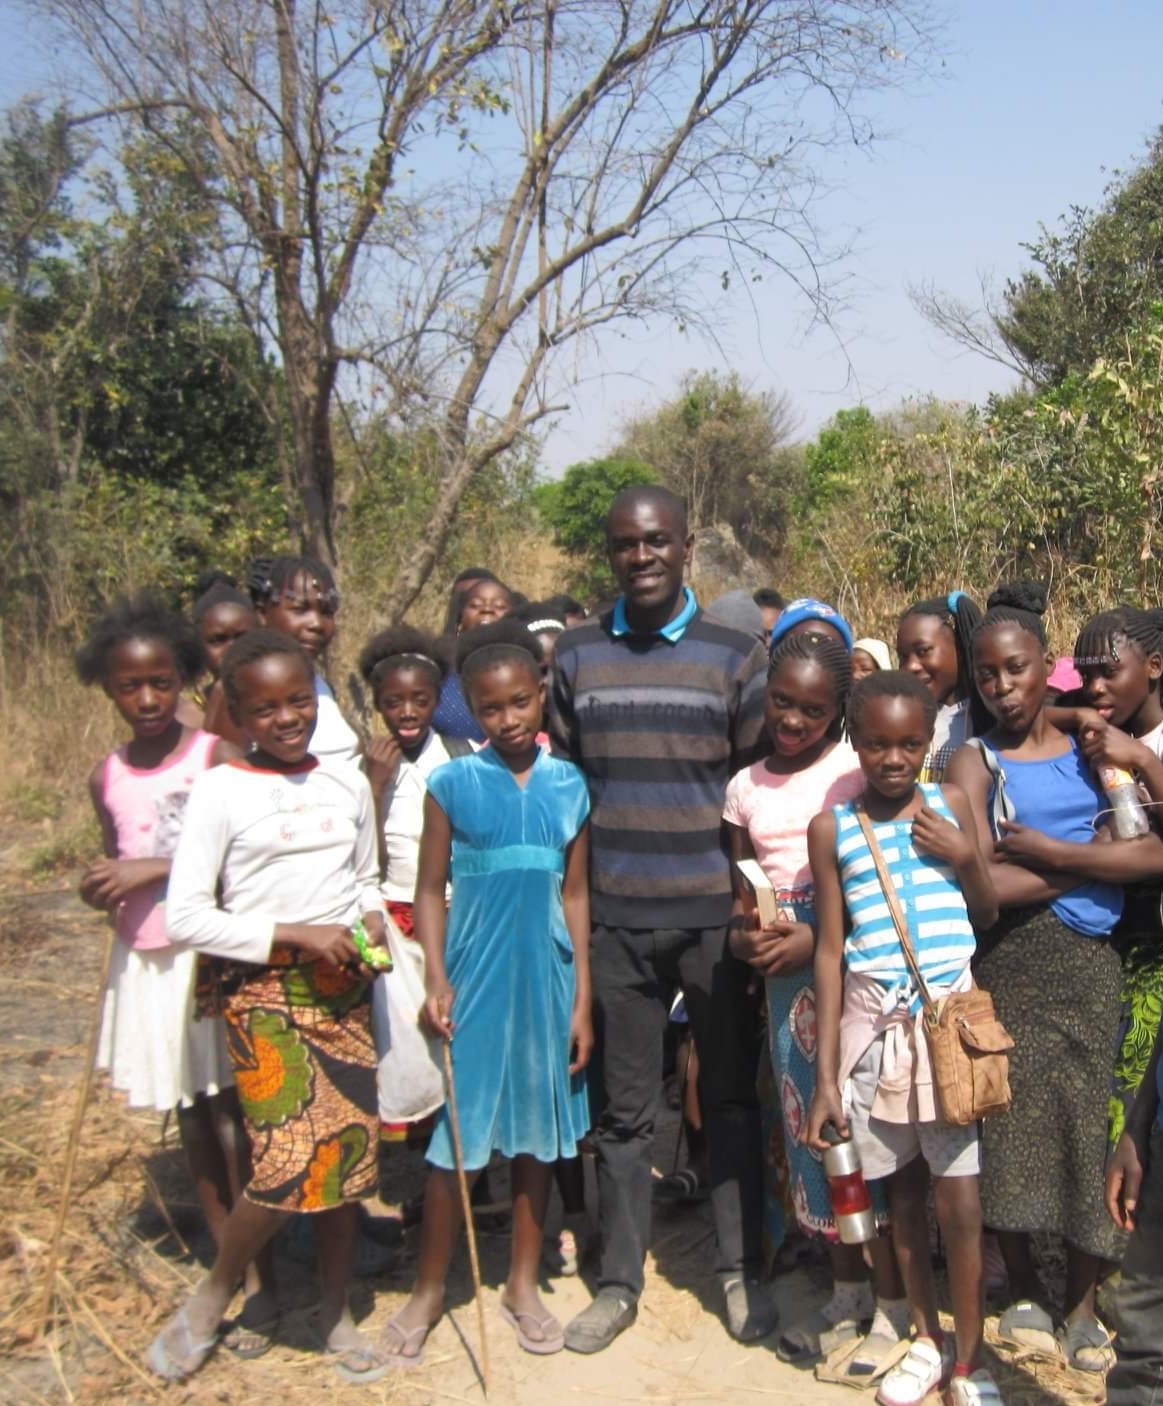 Sunday School Center - ministry in Africa.